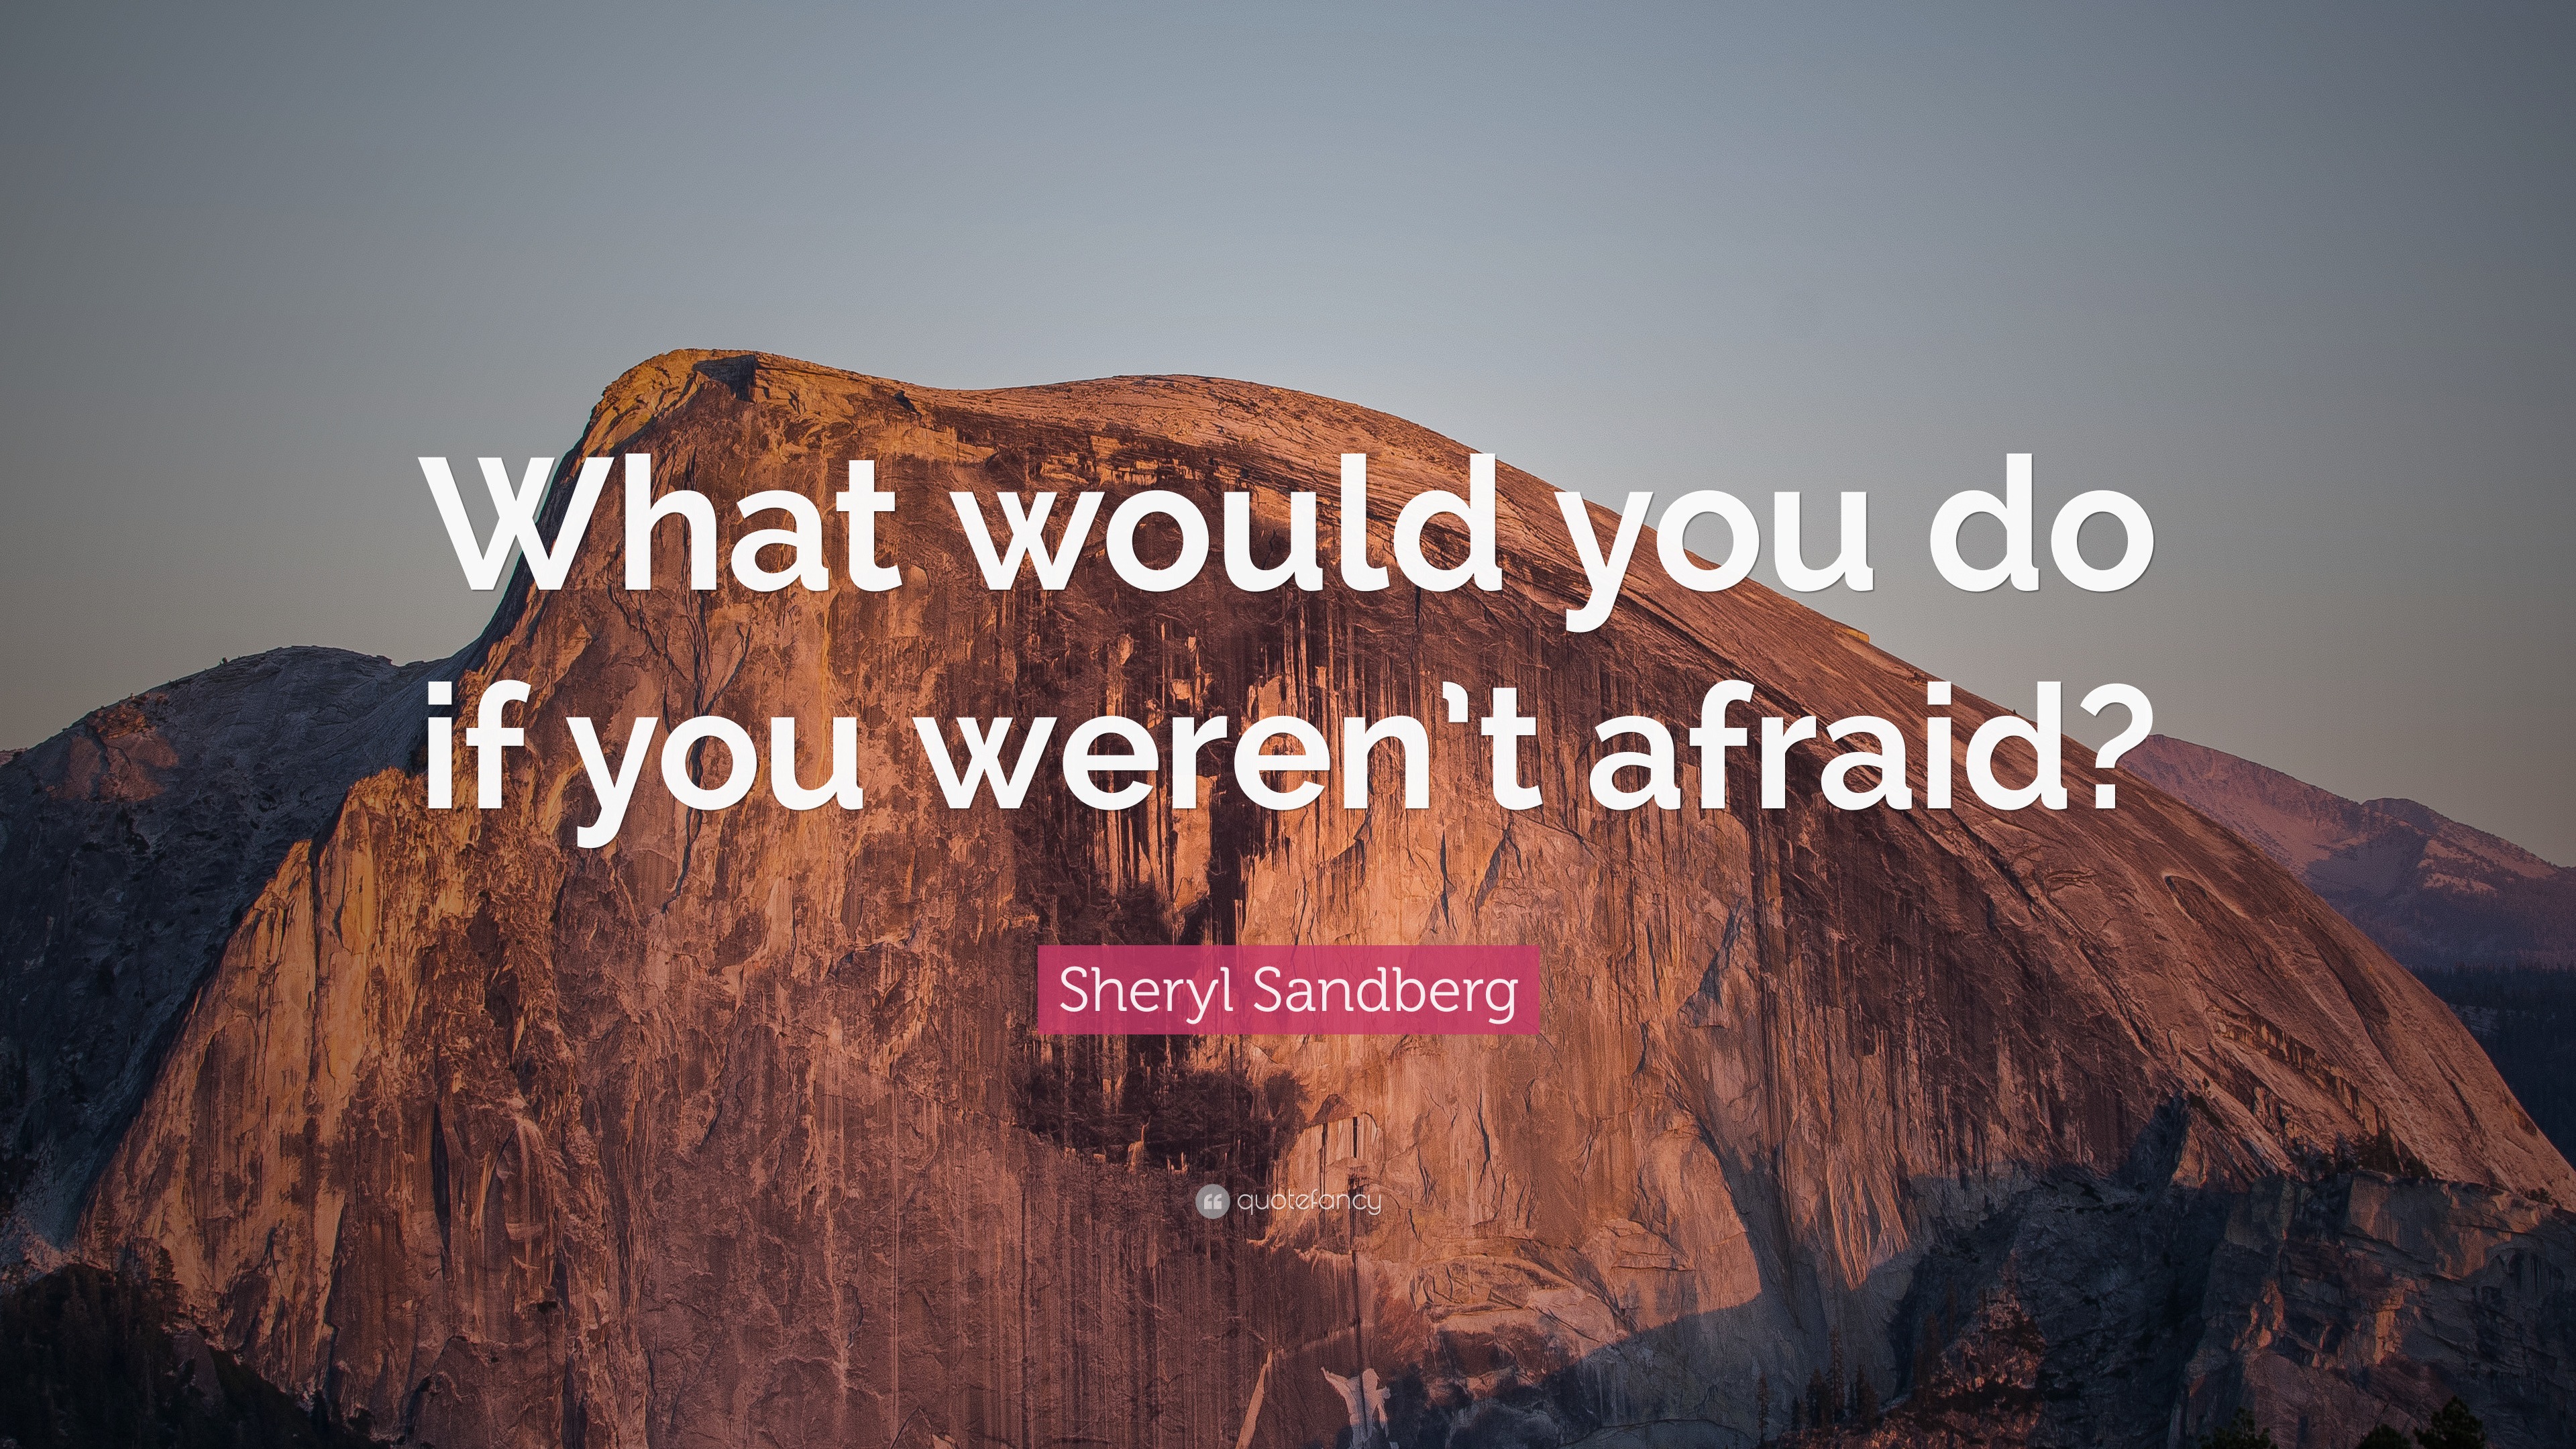 Sheryl Sandberg Quote: “What would you do if you weren’t afraid?” (25